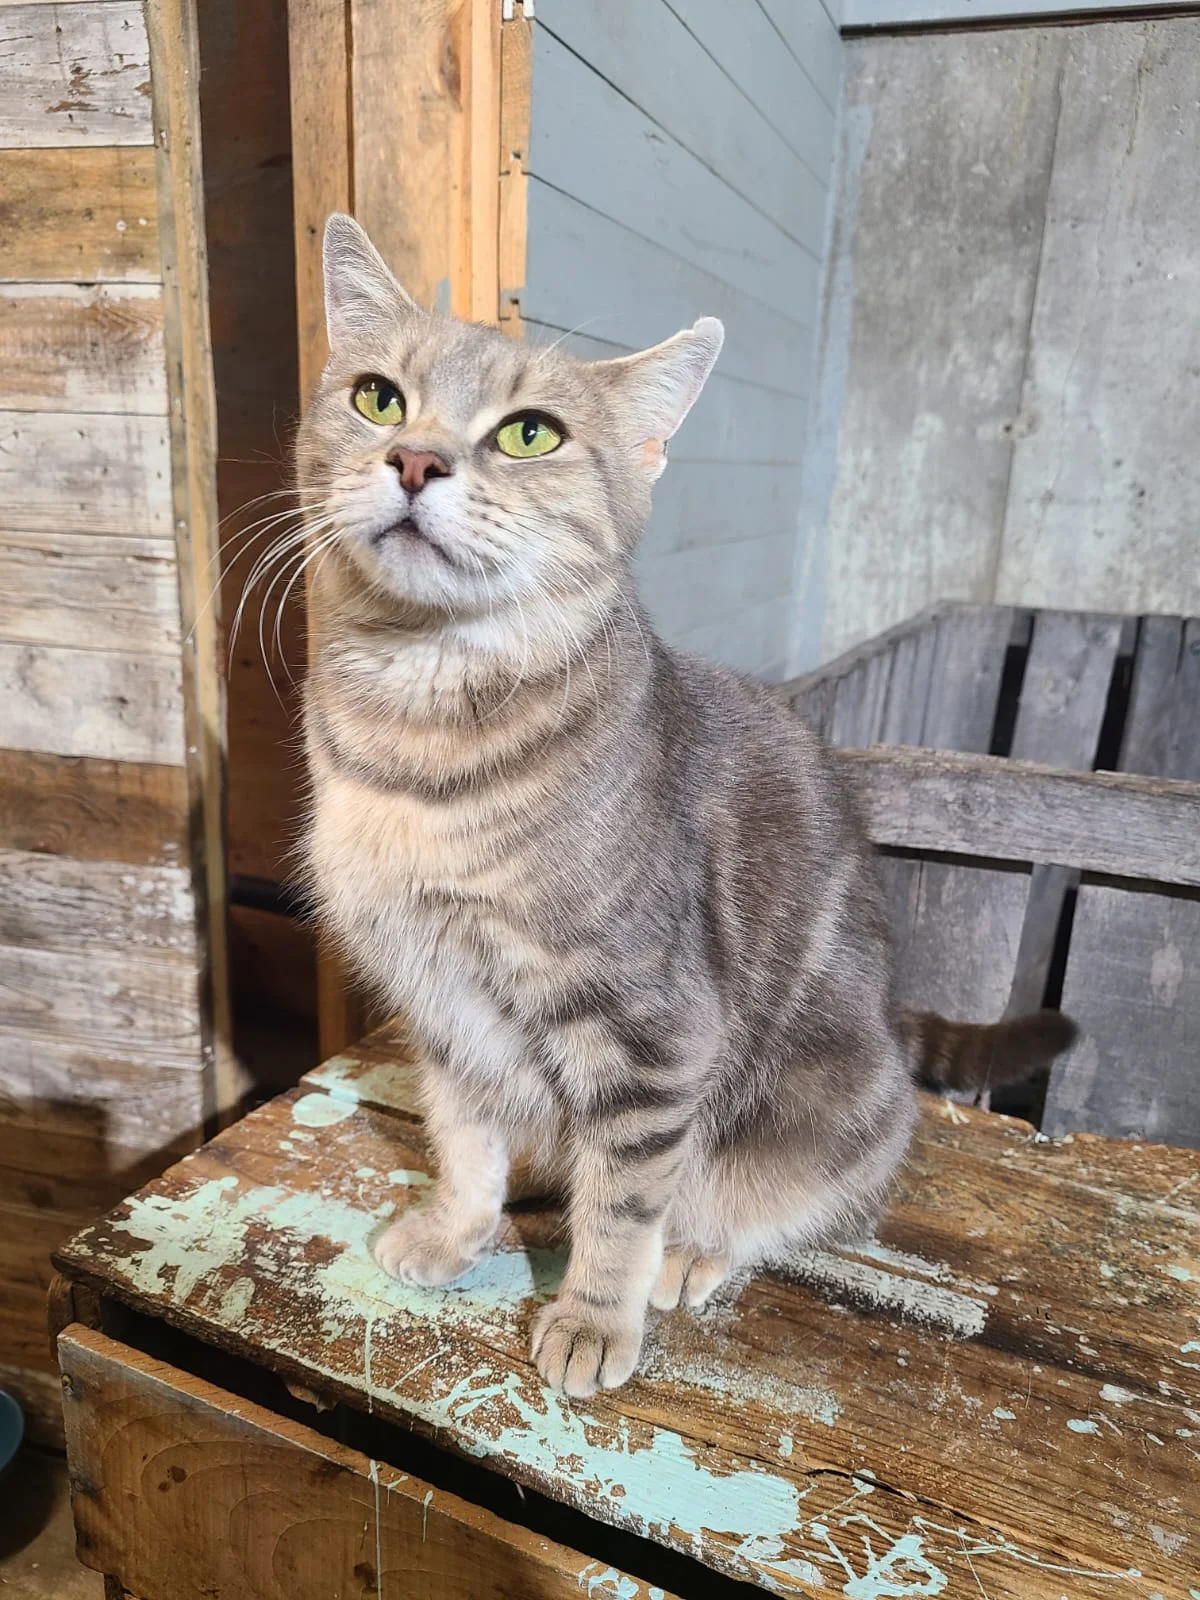 This pretty lady decided our barn was a good location to have her litter of kittens, lucky us :)